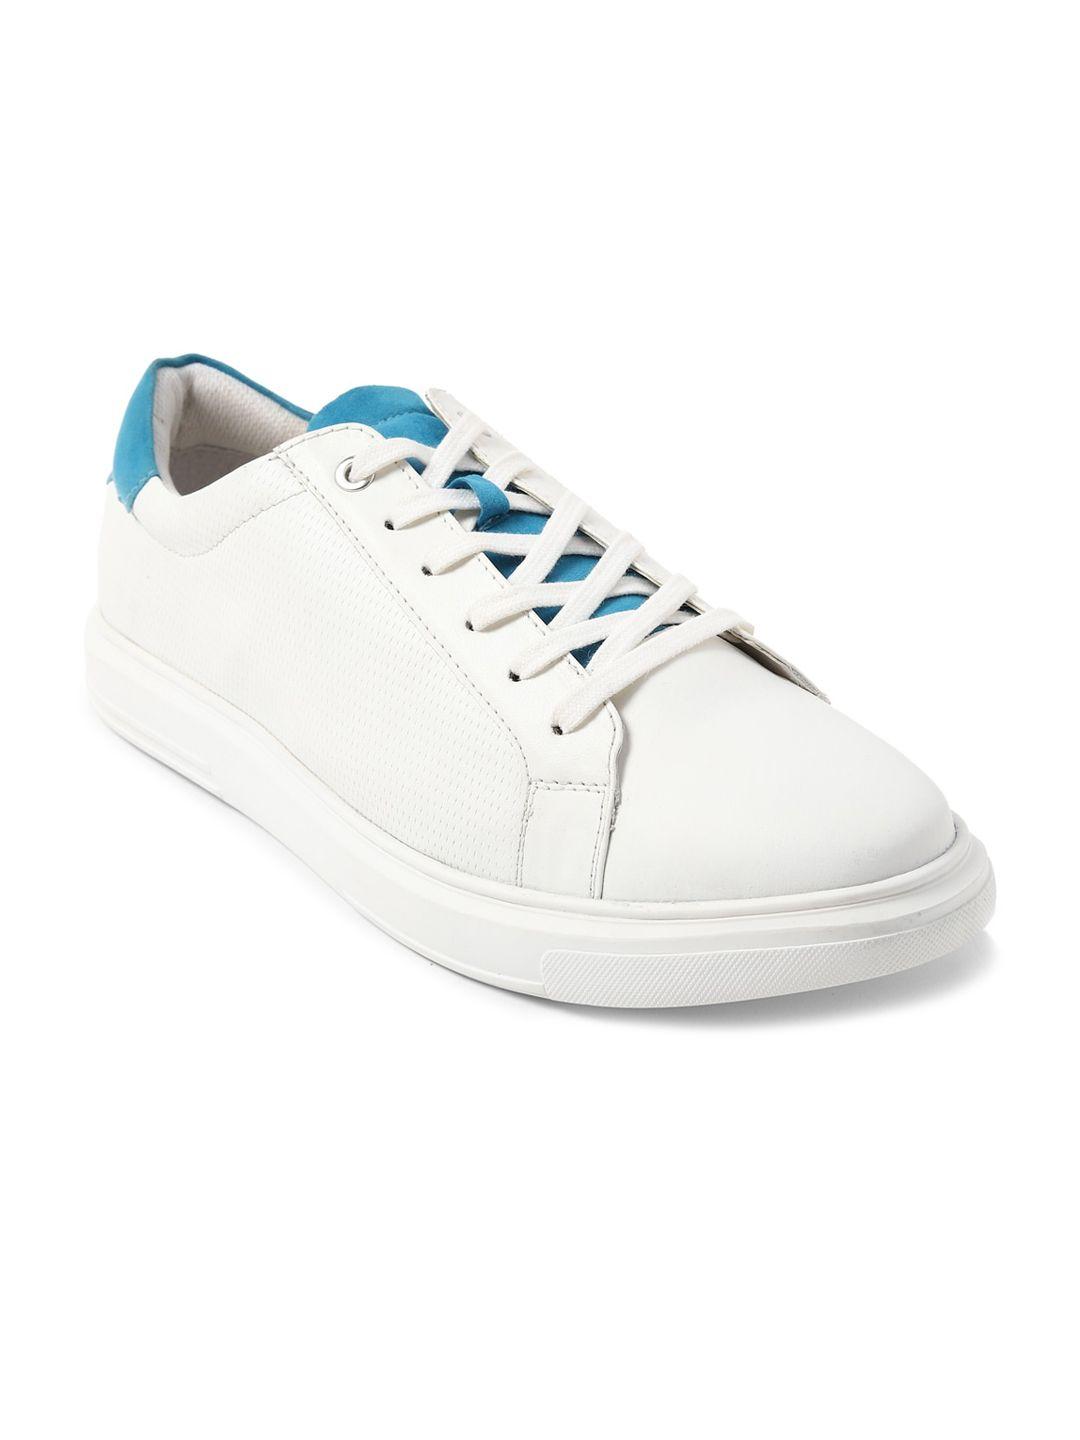 forever-21-men-blue-textured-pu-sneakers